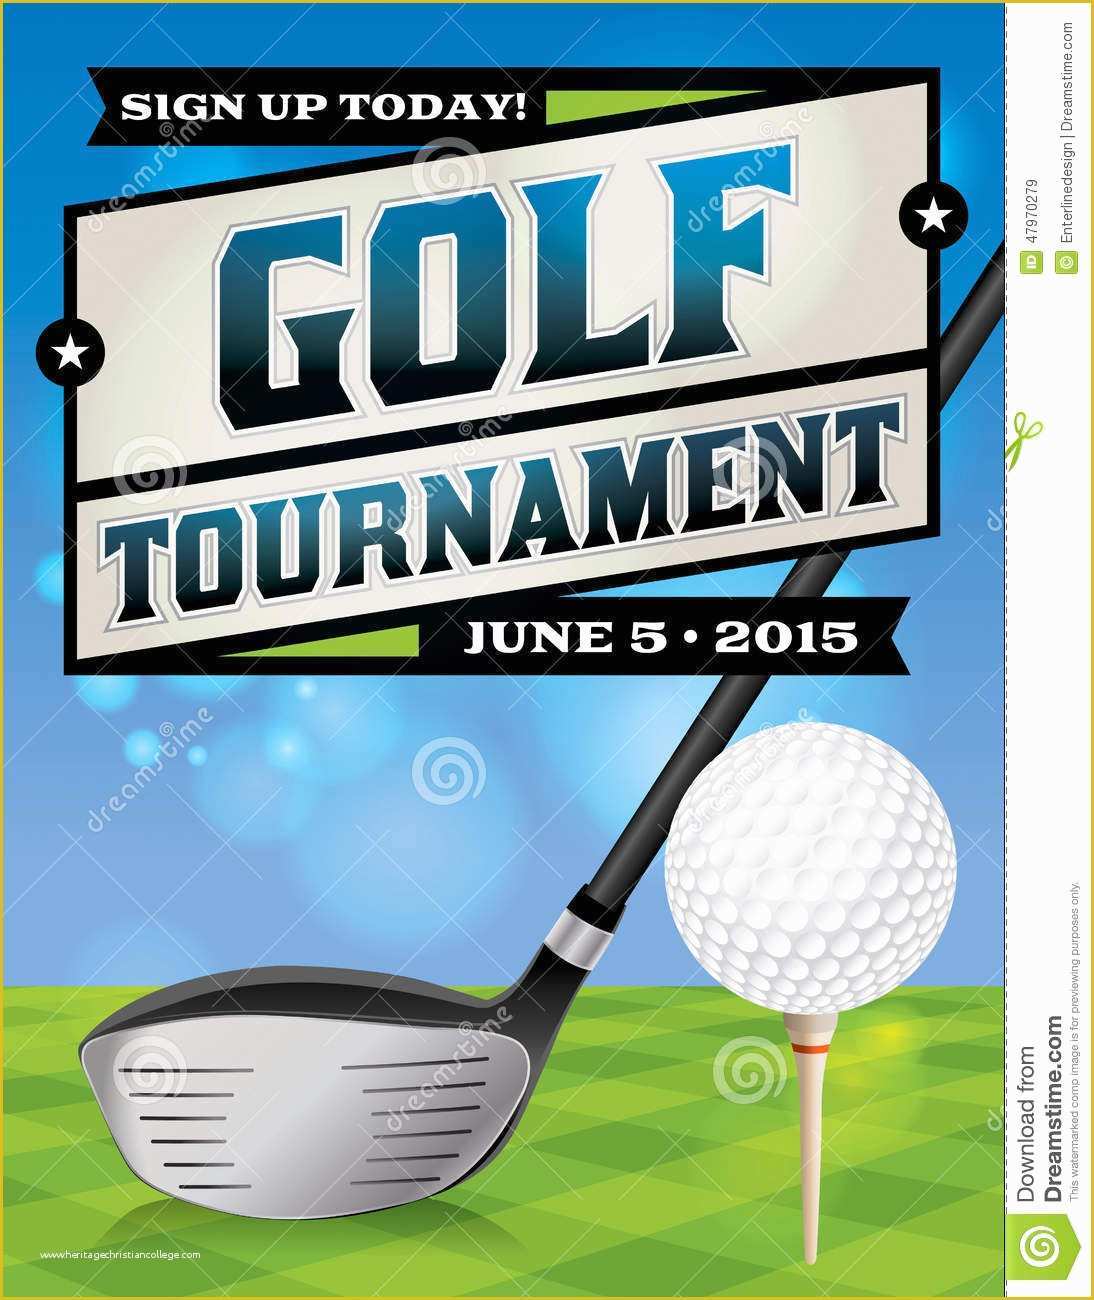 Golf tournament Flyer Template Download Free Of Golf tournament Flyer Illustration Stock Vector